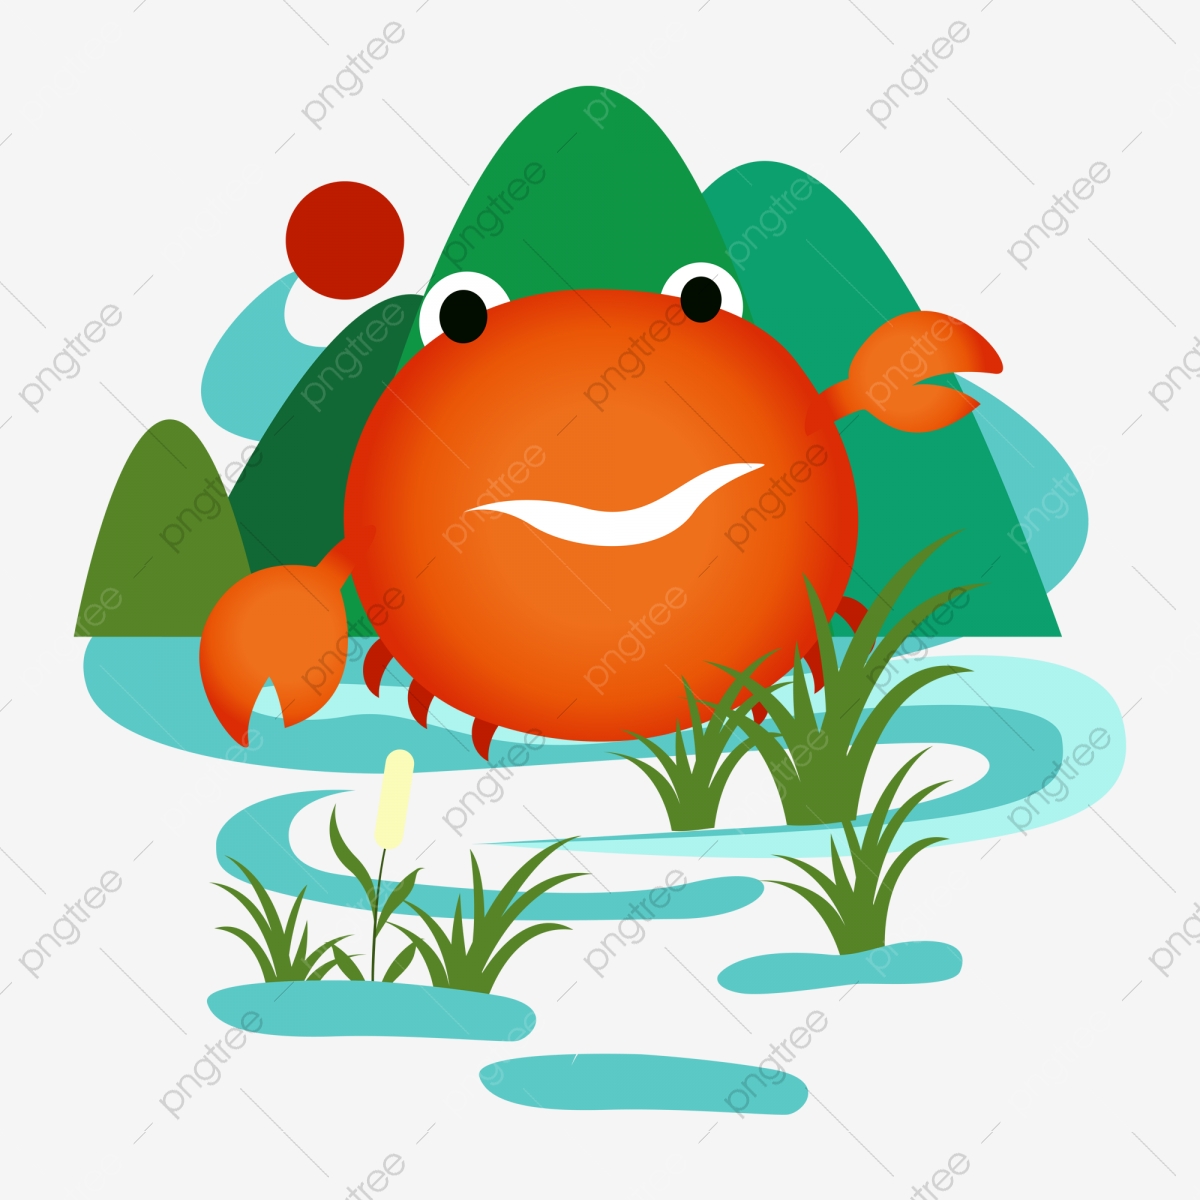 Mountain clipart water. Happy expression golden crab